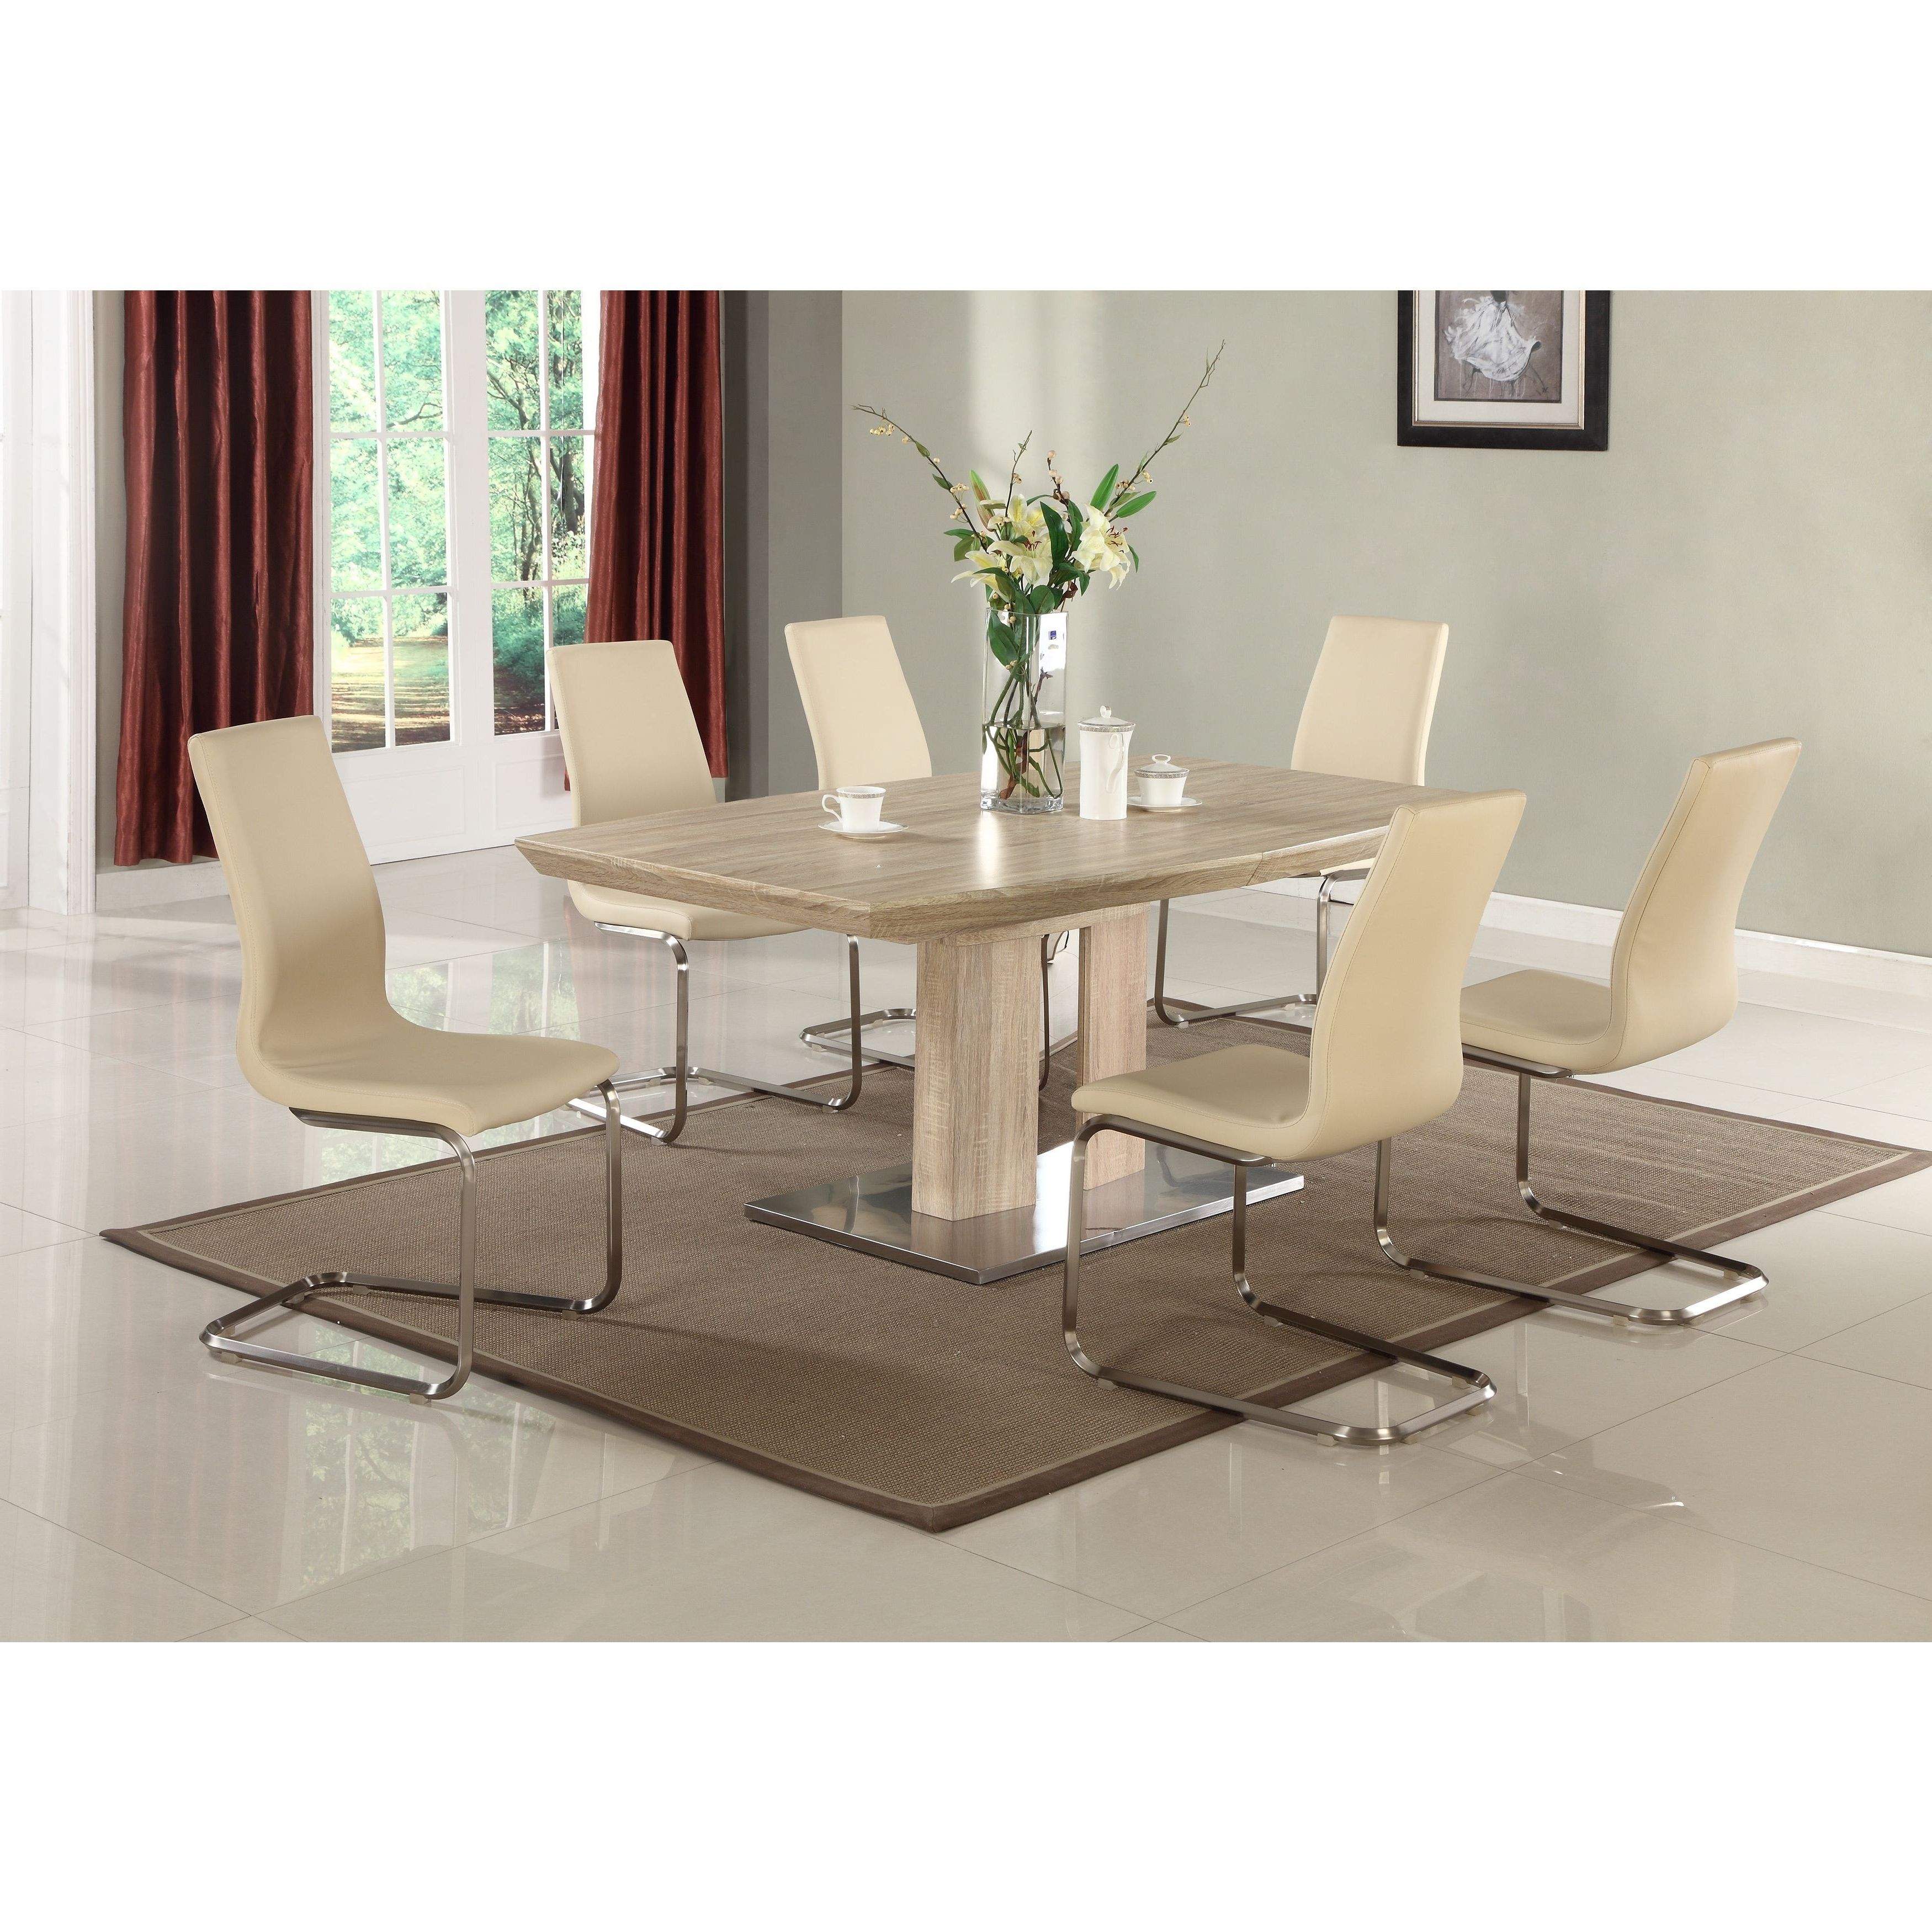 2018 Glass Top Oak Dining Tables Throughout Stainless Steel Dining Table With Glass Top Best Of This Modern (View 25 of 25)